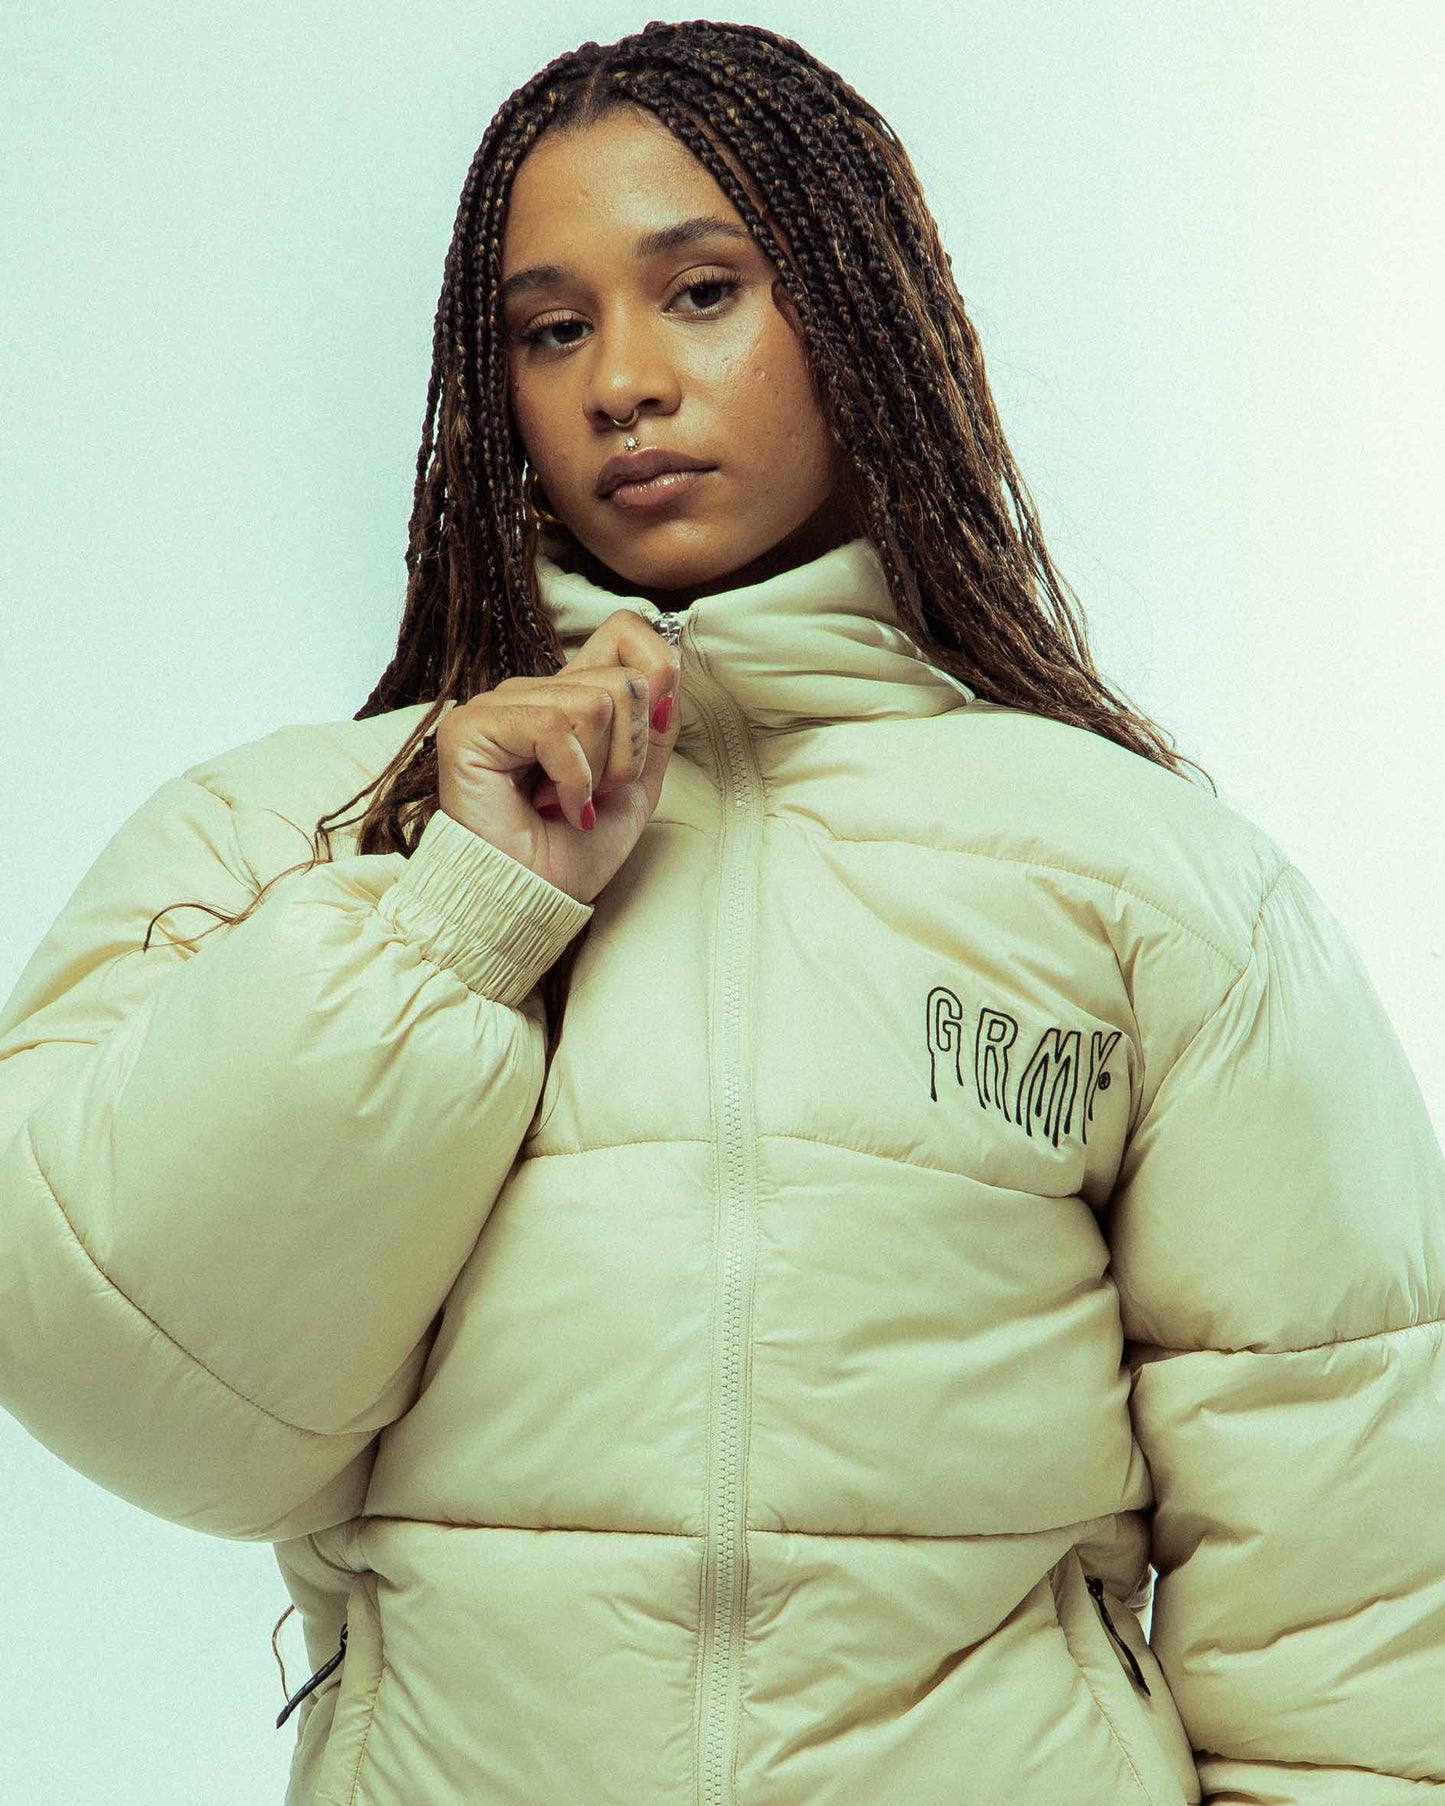 BACK AT YOU PUFFER JACKET CREAM